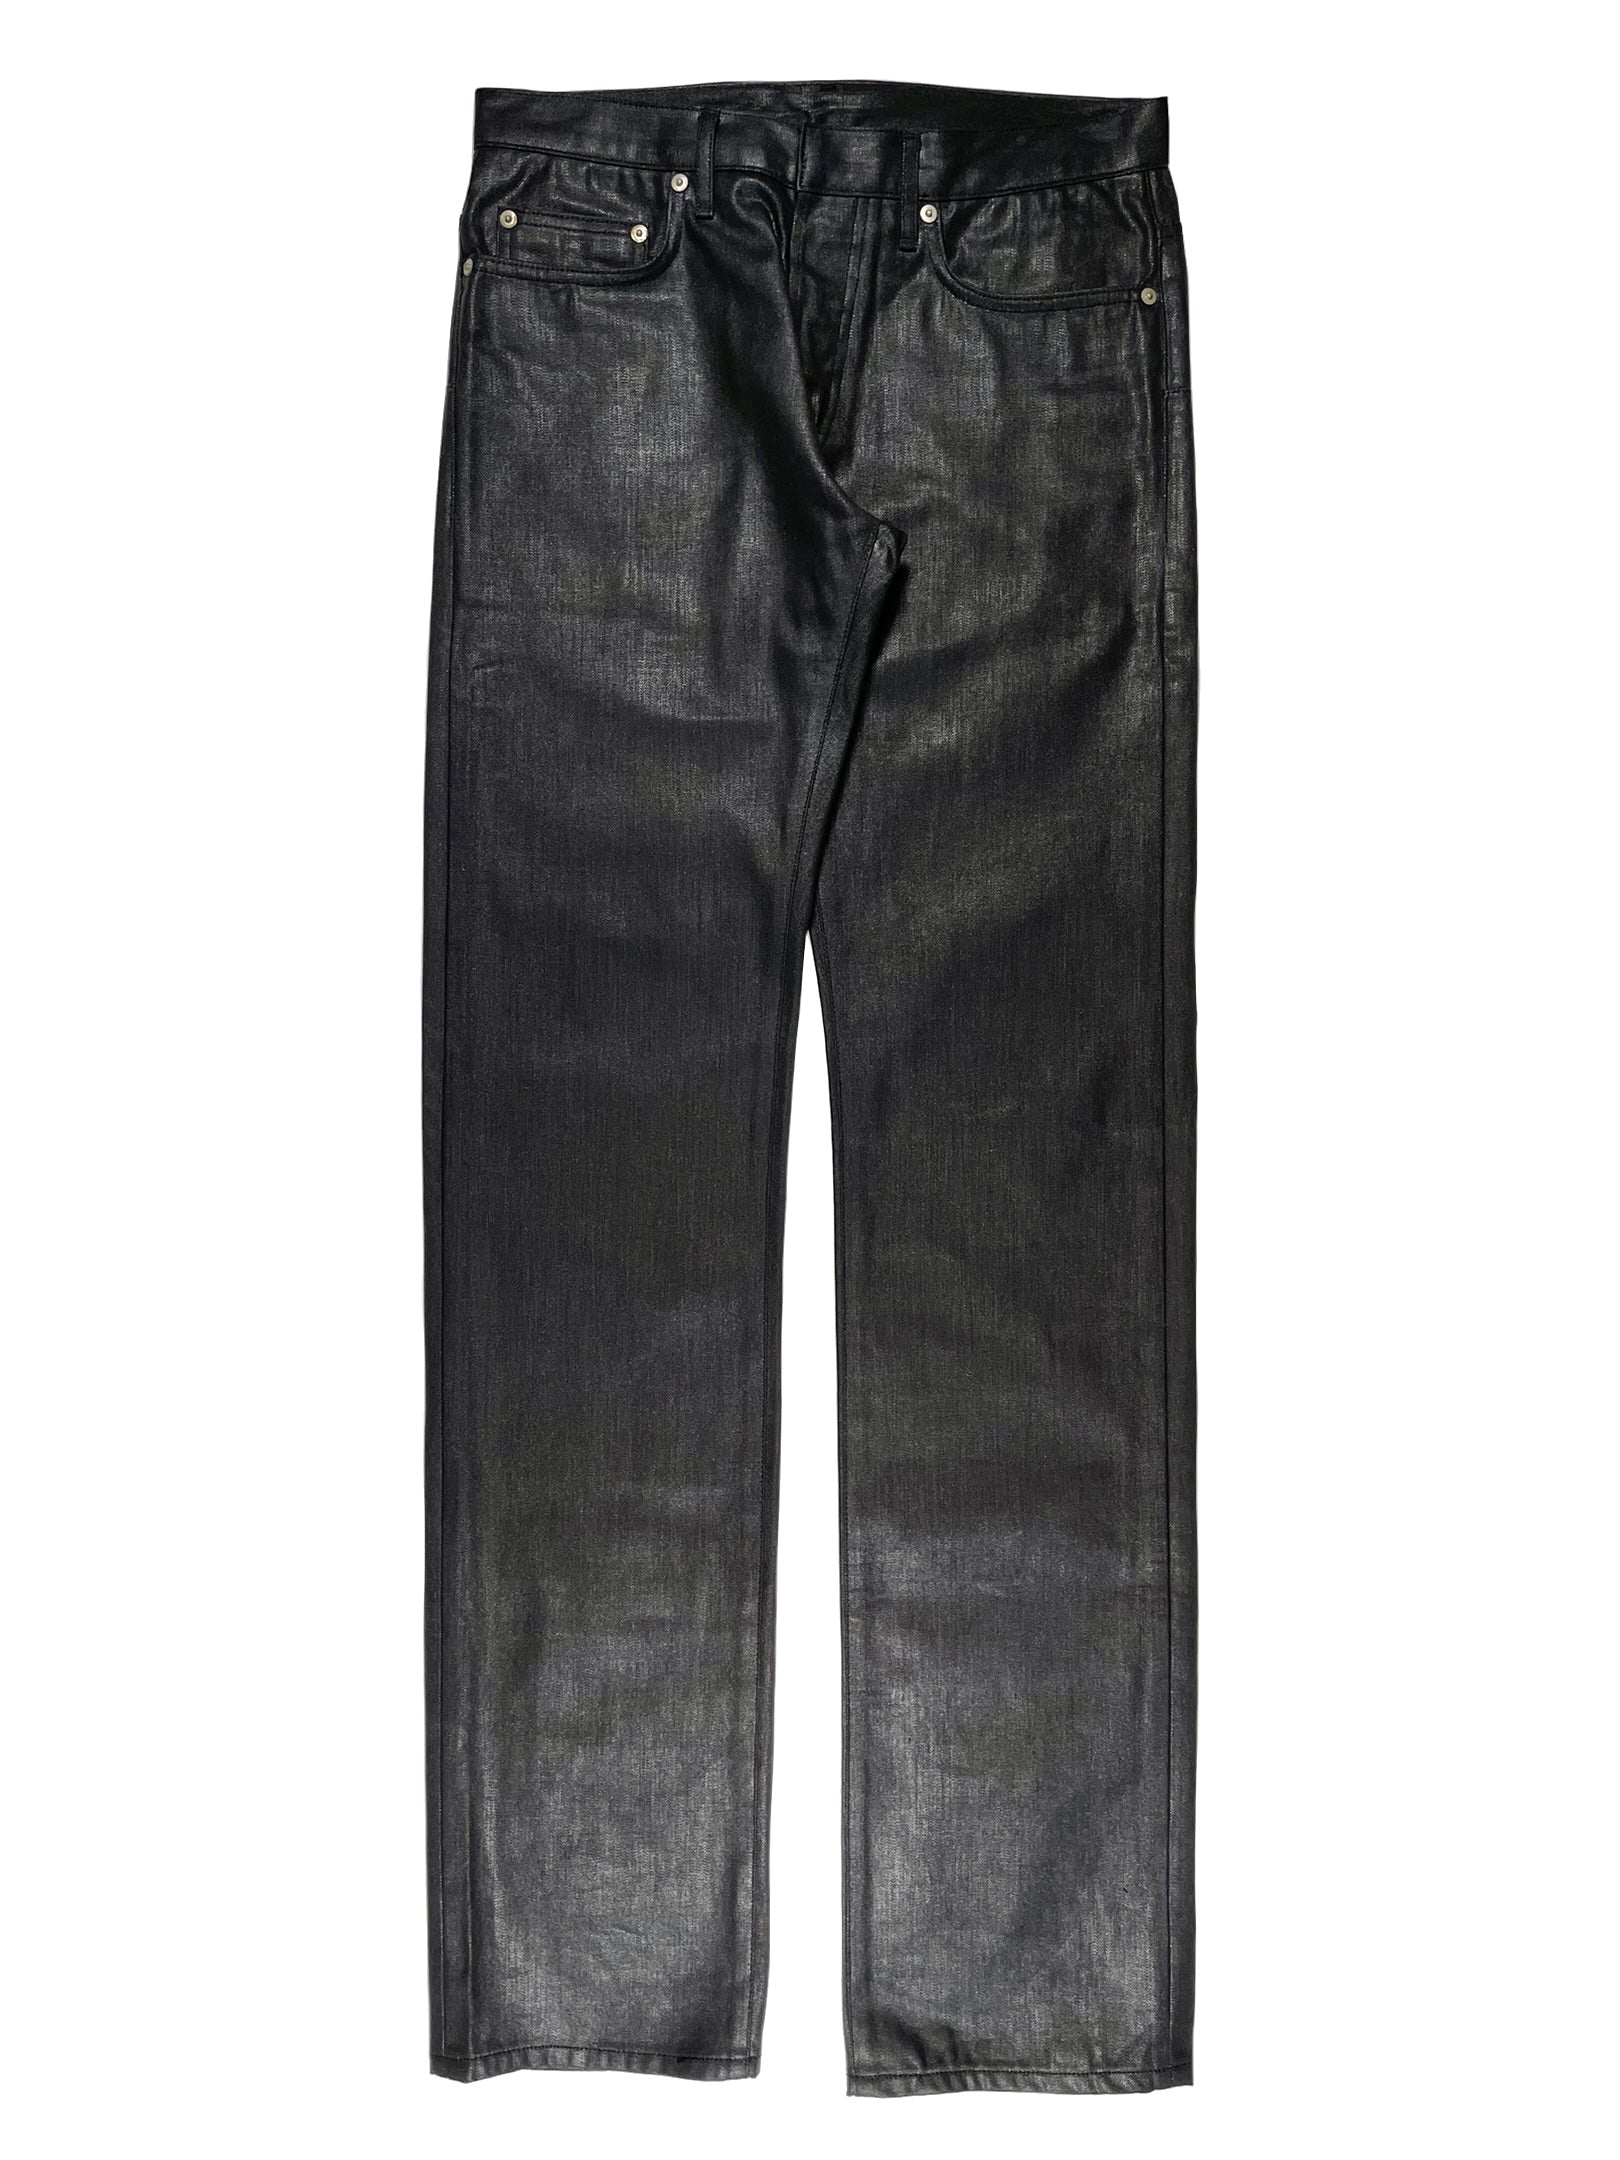 2000s Dior Homme polyurethane coated denim – elevated archives